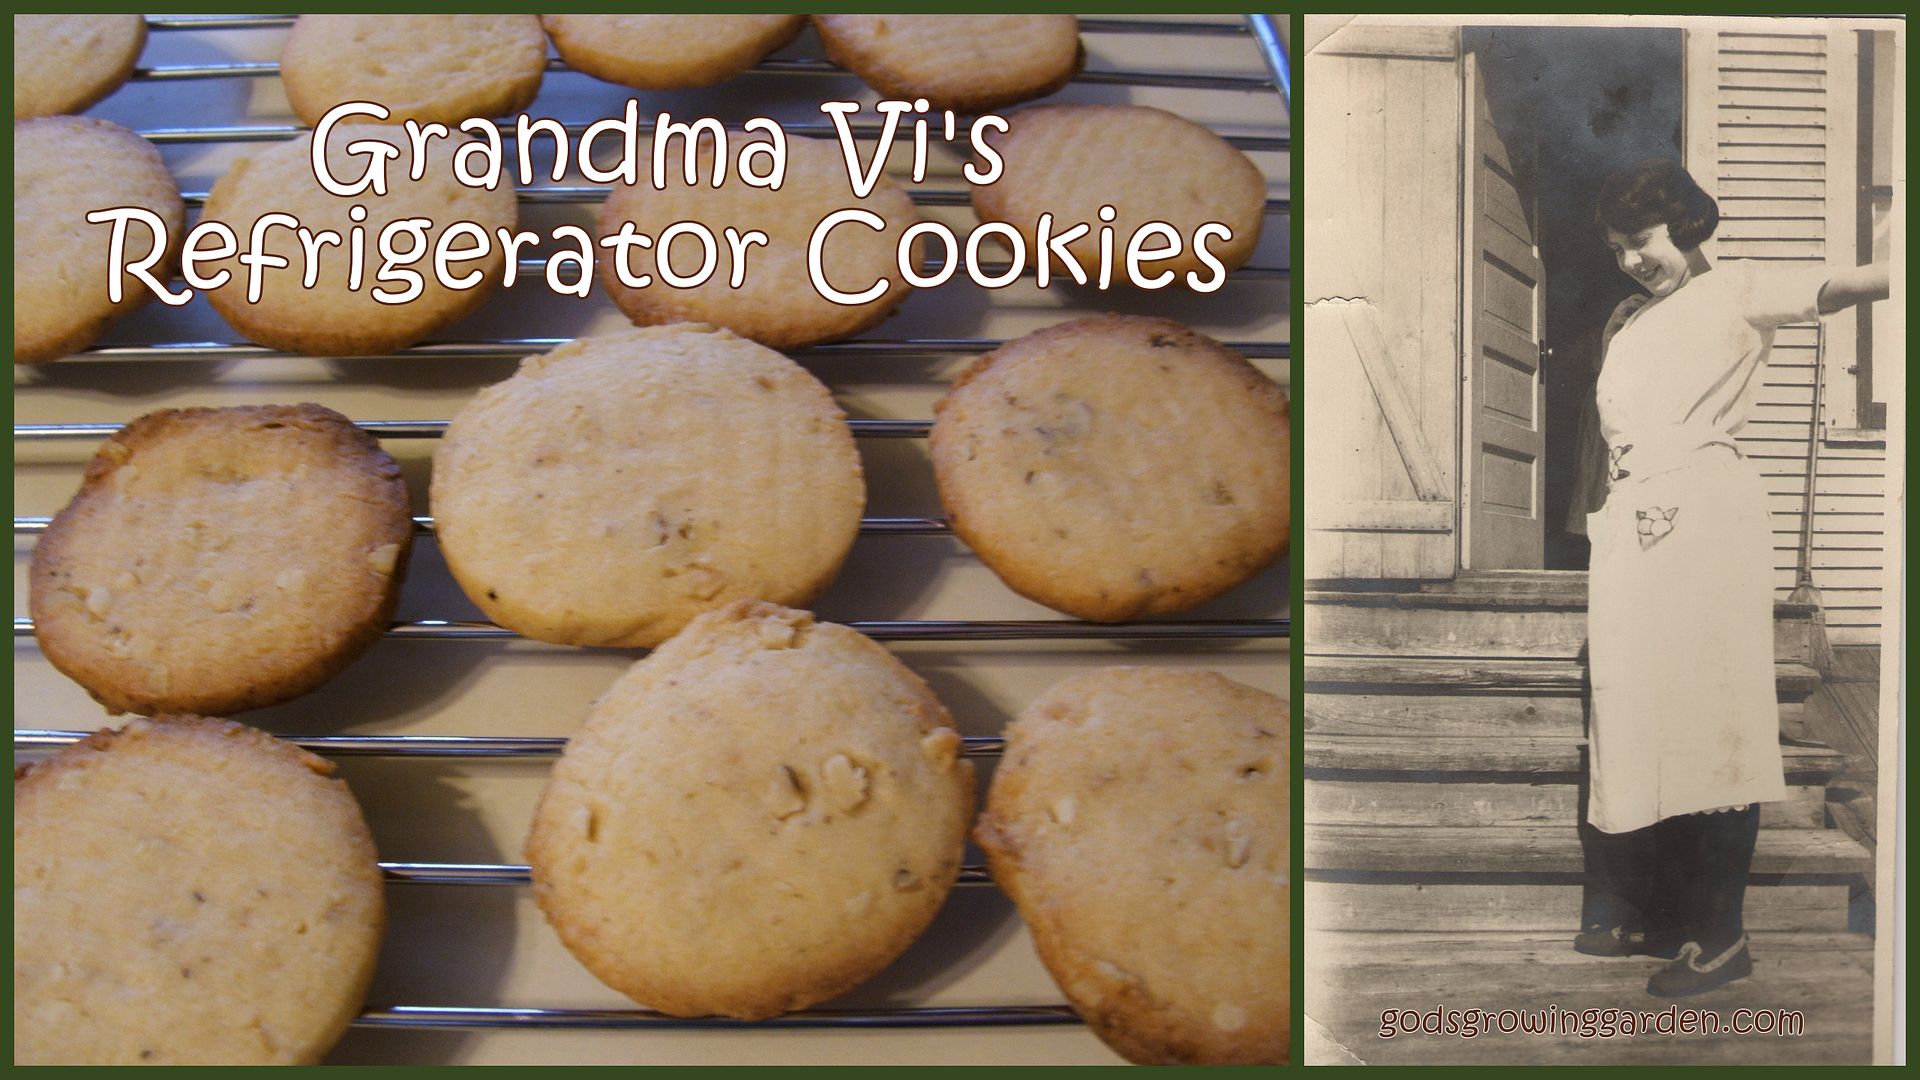 Grandma Vi's Fridge Cookies by Angie Ouellette-Tower for godsgrowinggarden.com photo OldPhotosTowerFam_zps549d9112.jpg